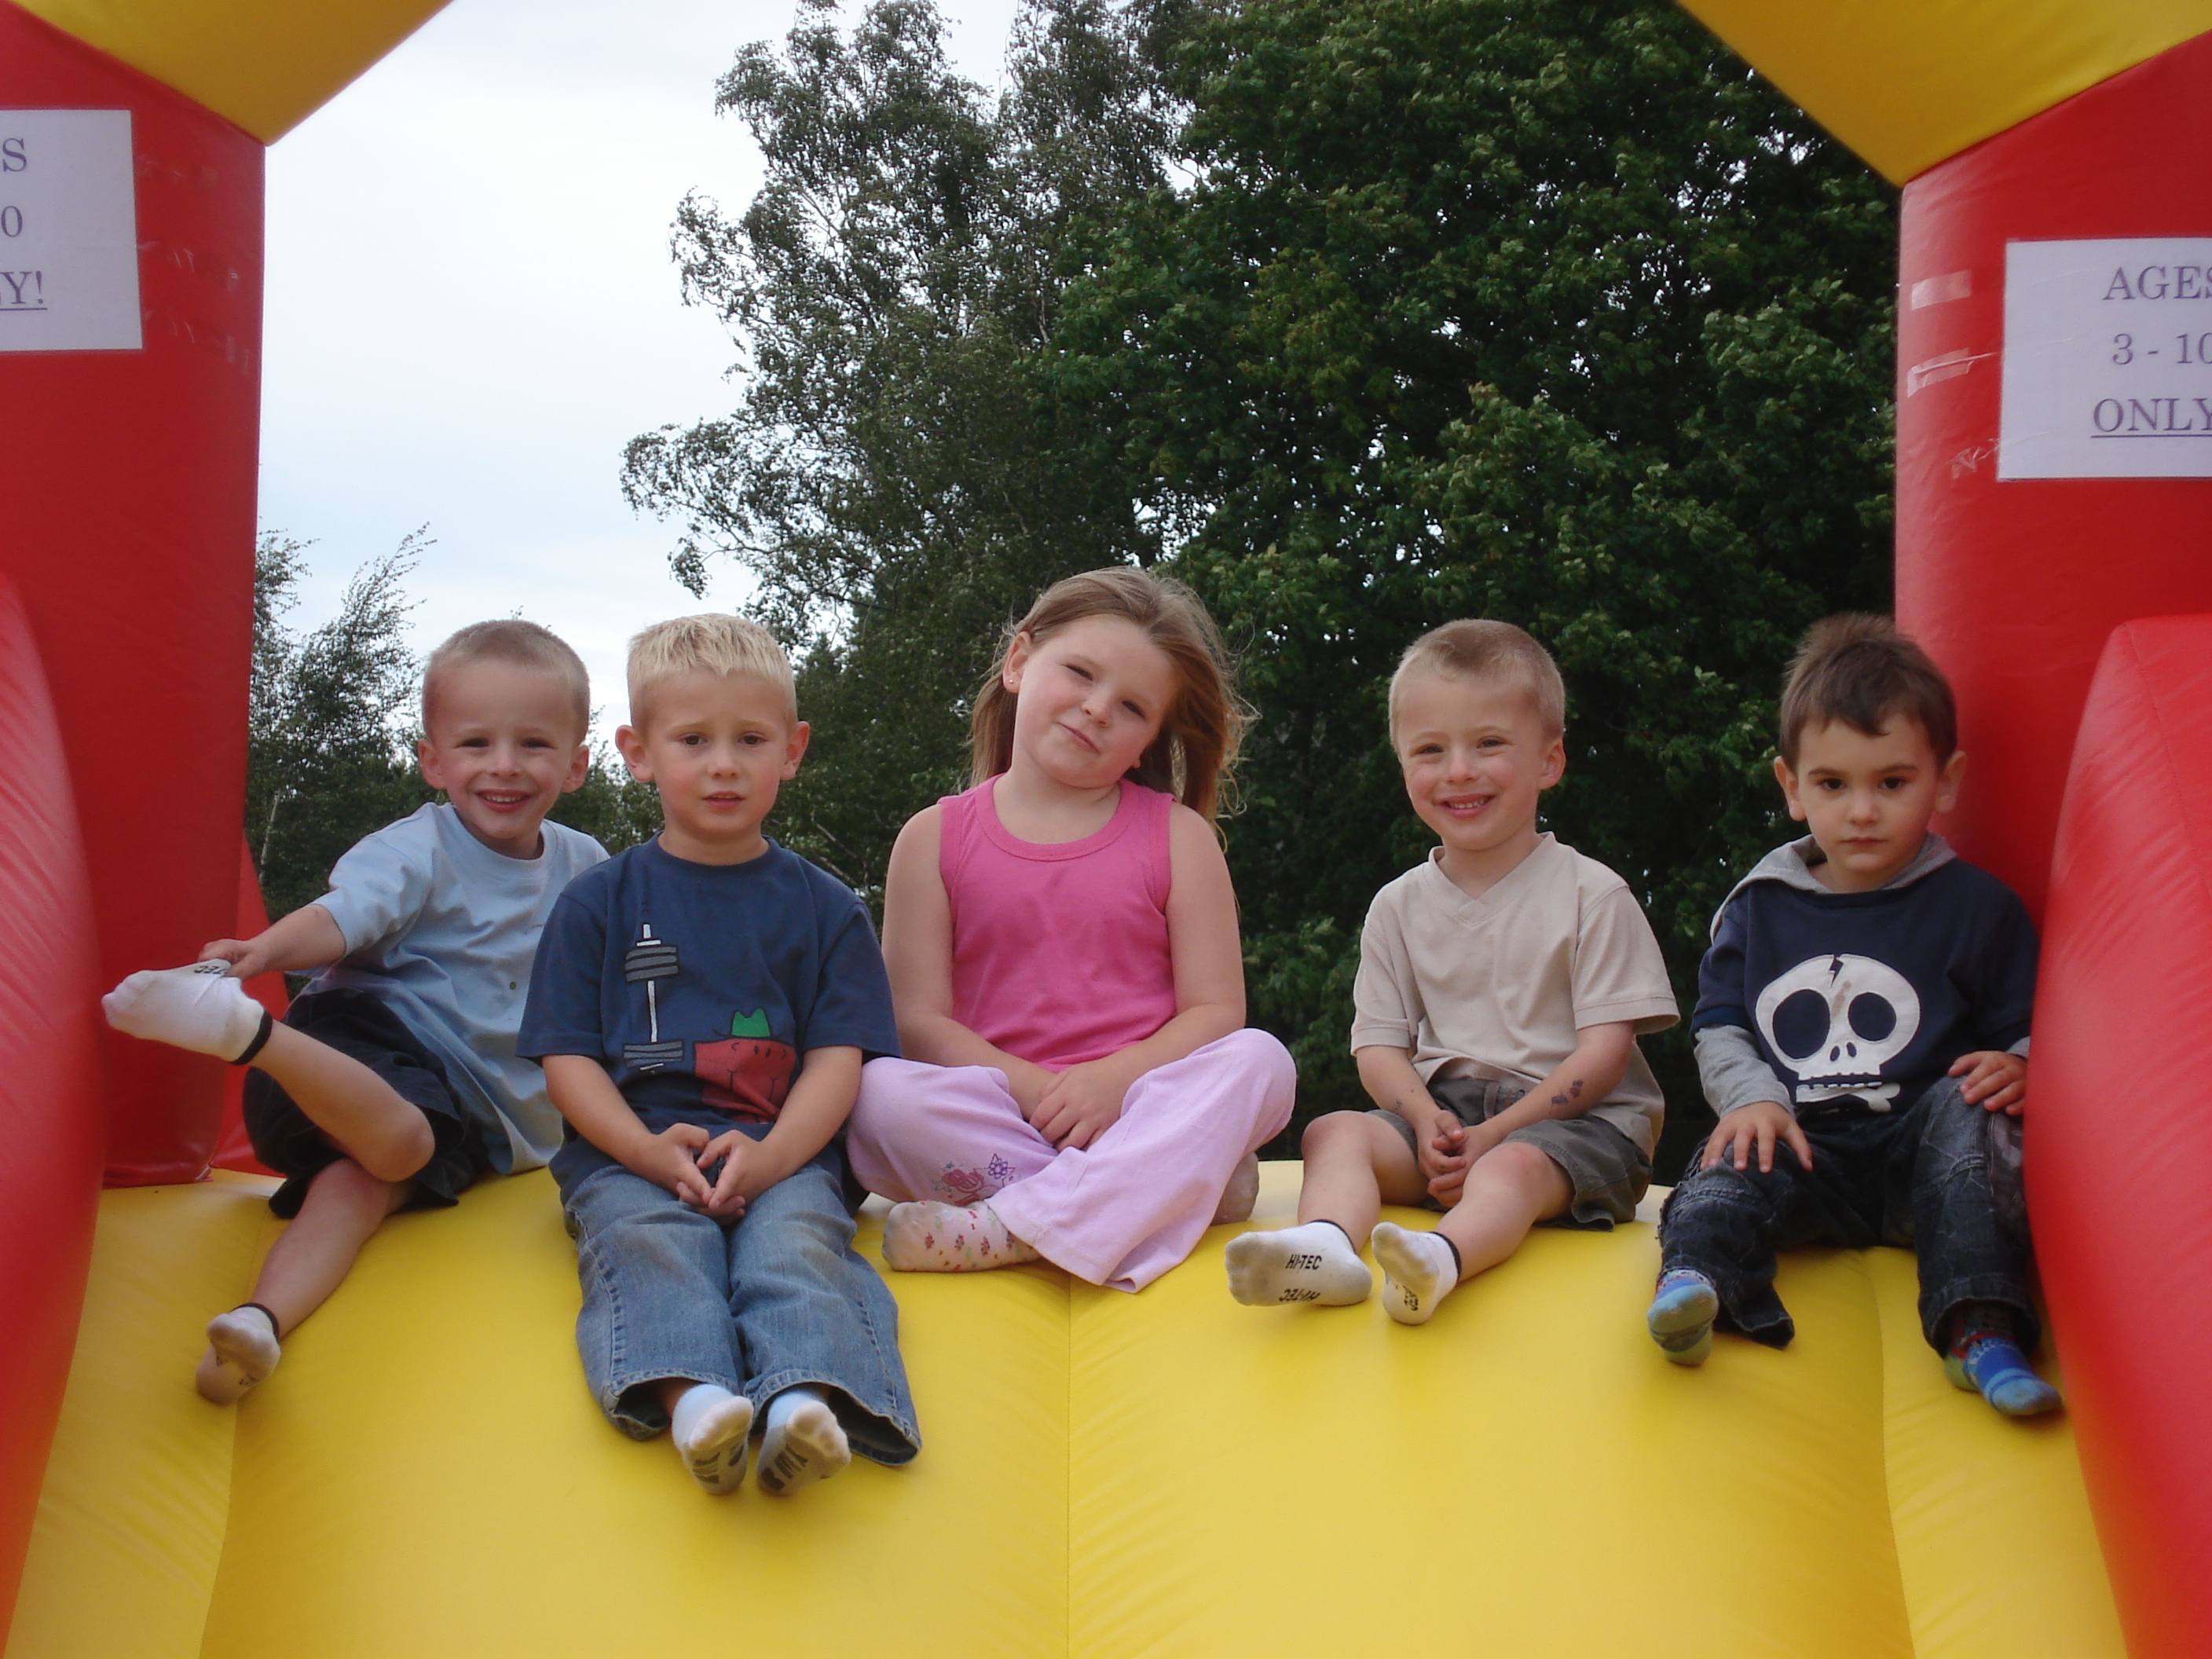 Kids sitting on inflatable